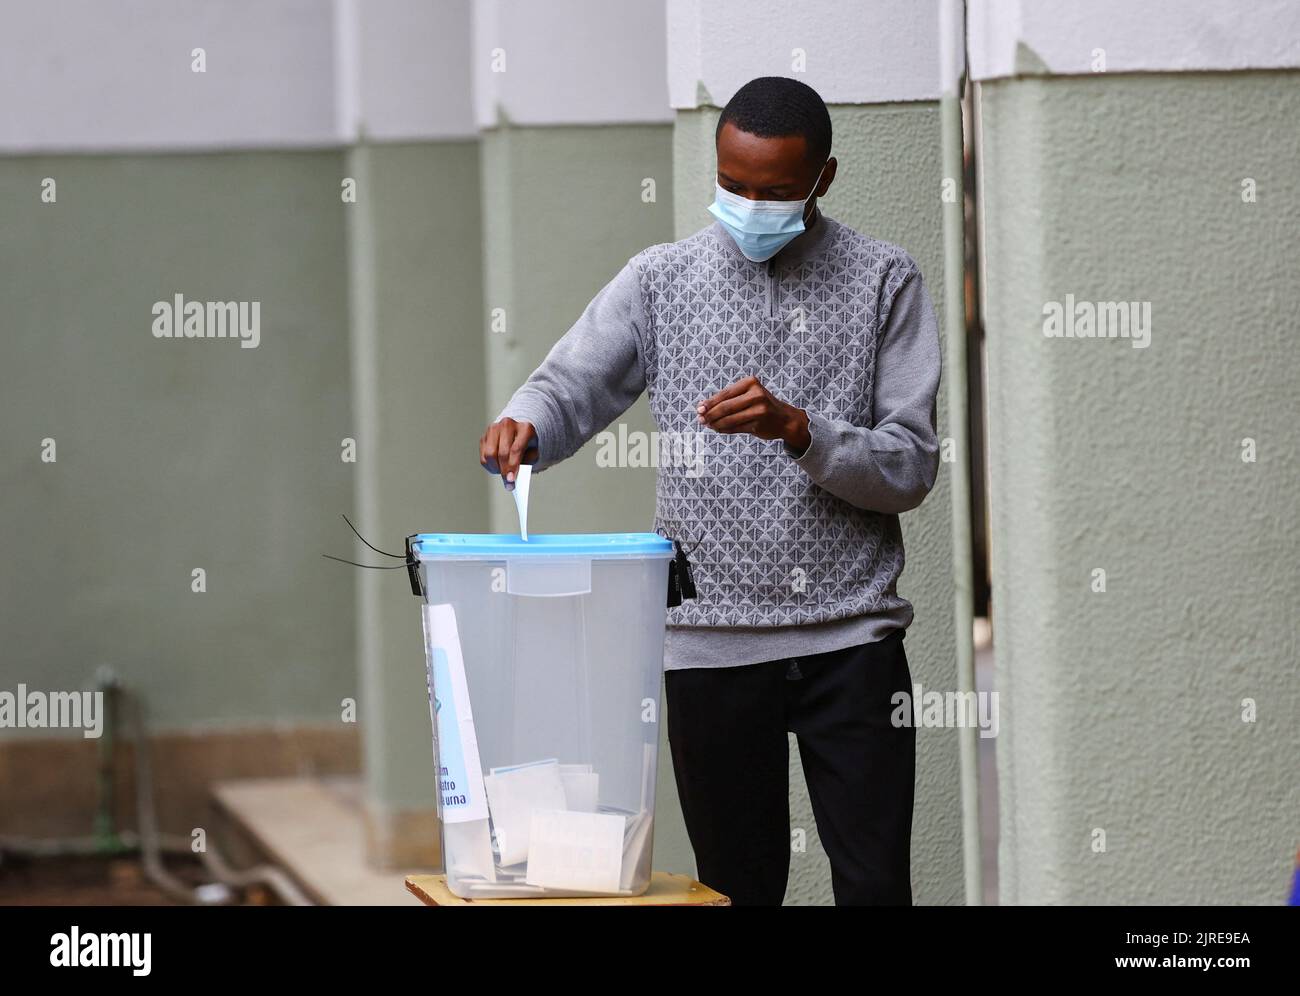 A man casts his vote during the general election at Nzinga Mbandi school, in the capital Luanda, Angola August 24, 2022. REUTERS/Siphiwe Sibeko Stock Photo